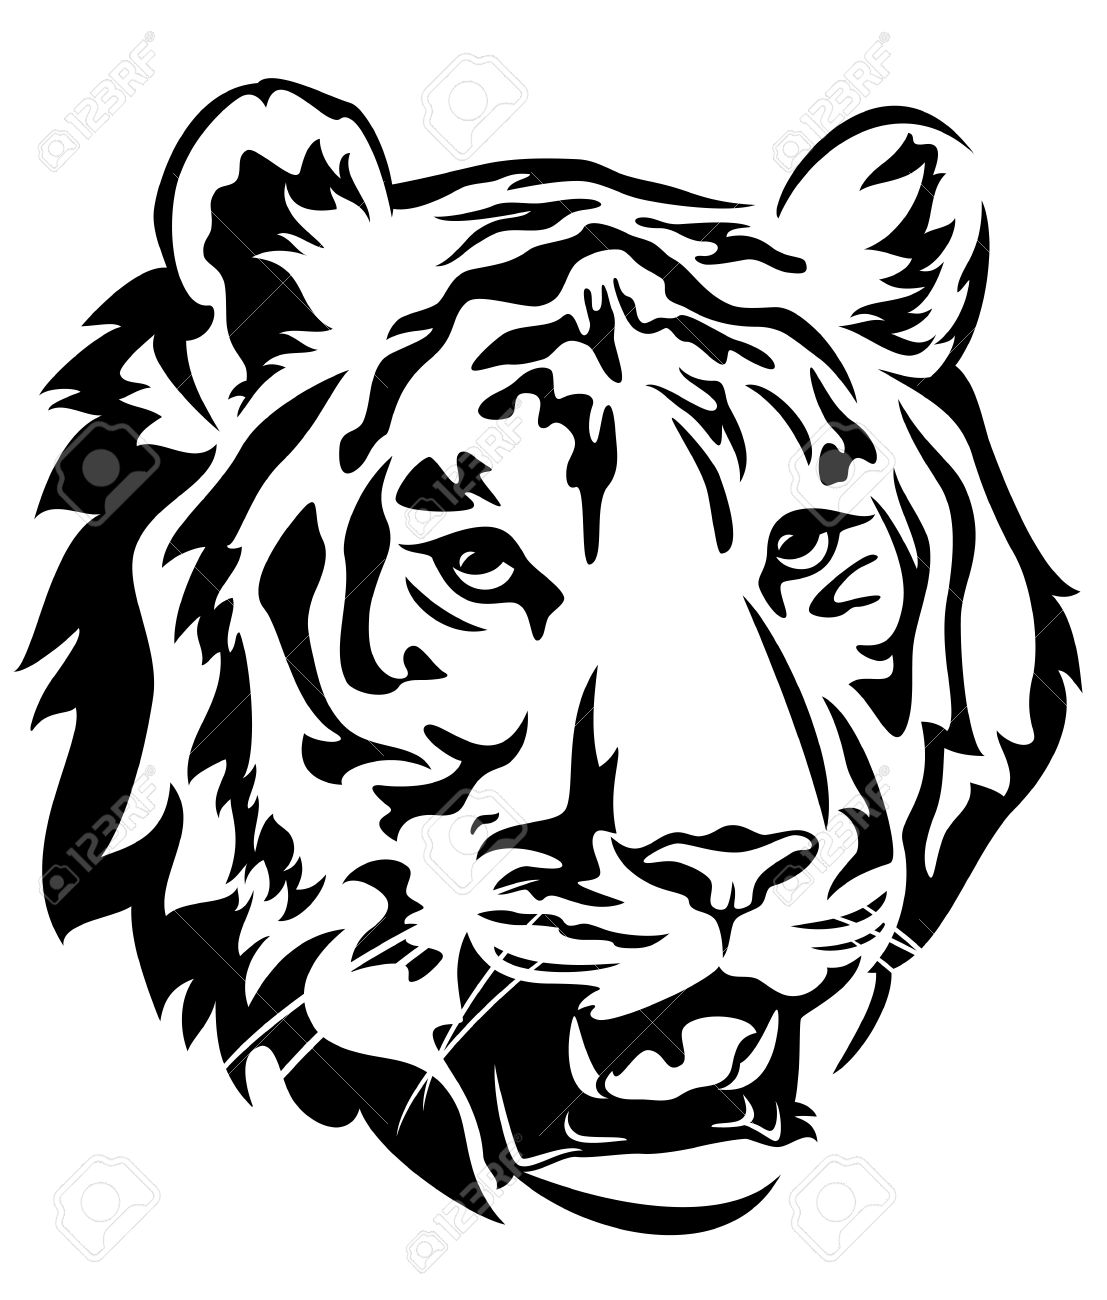 Tiger Clipart Black And White Free